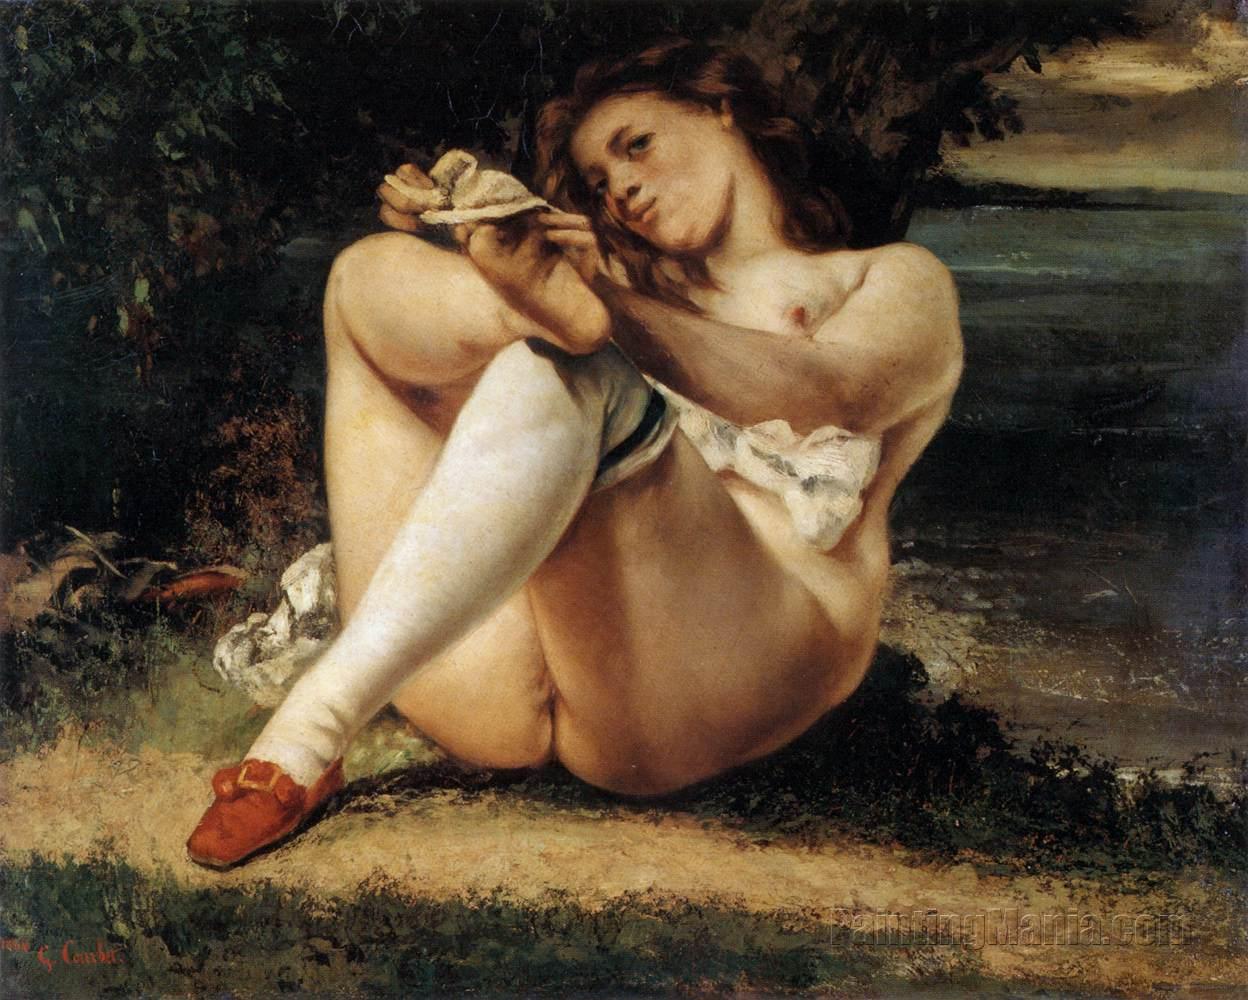 Woman with White Stockings